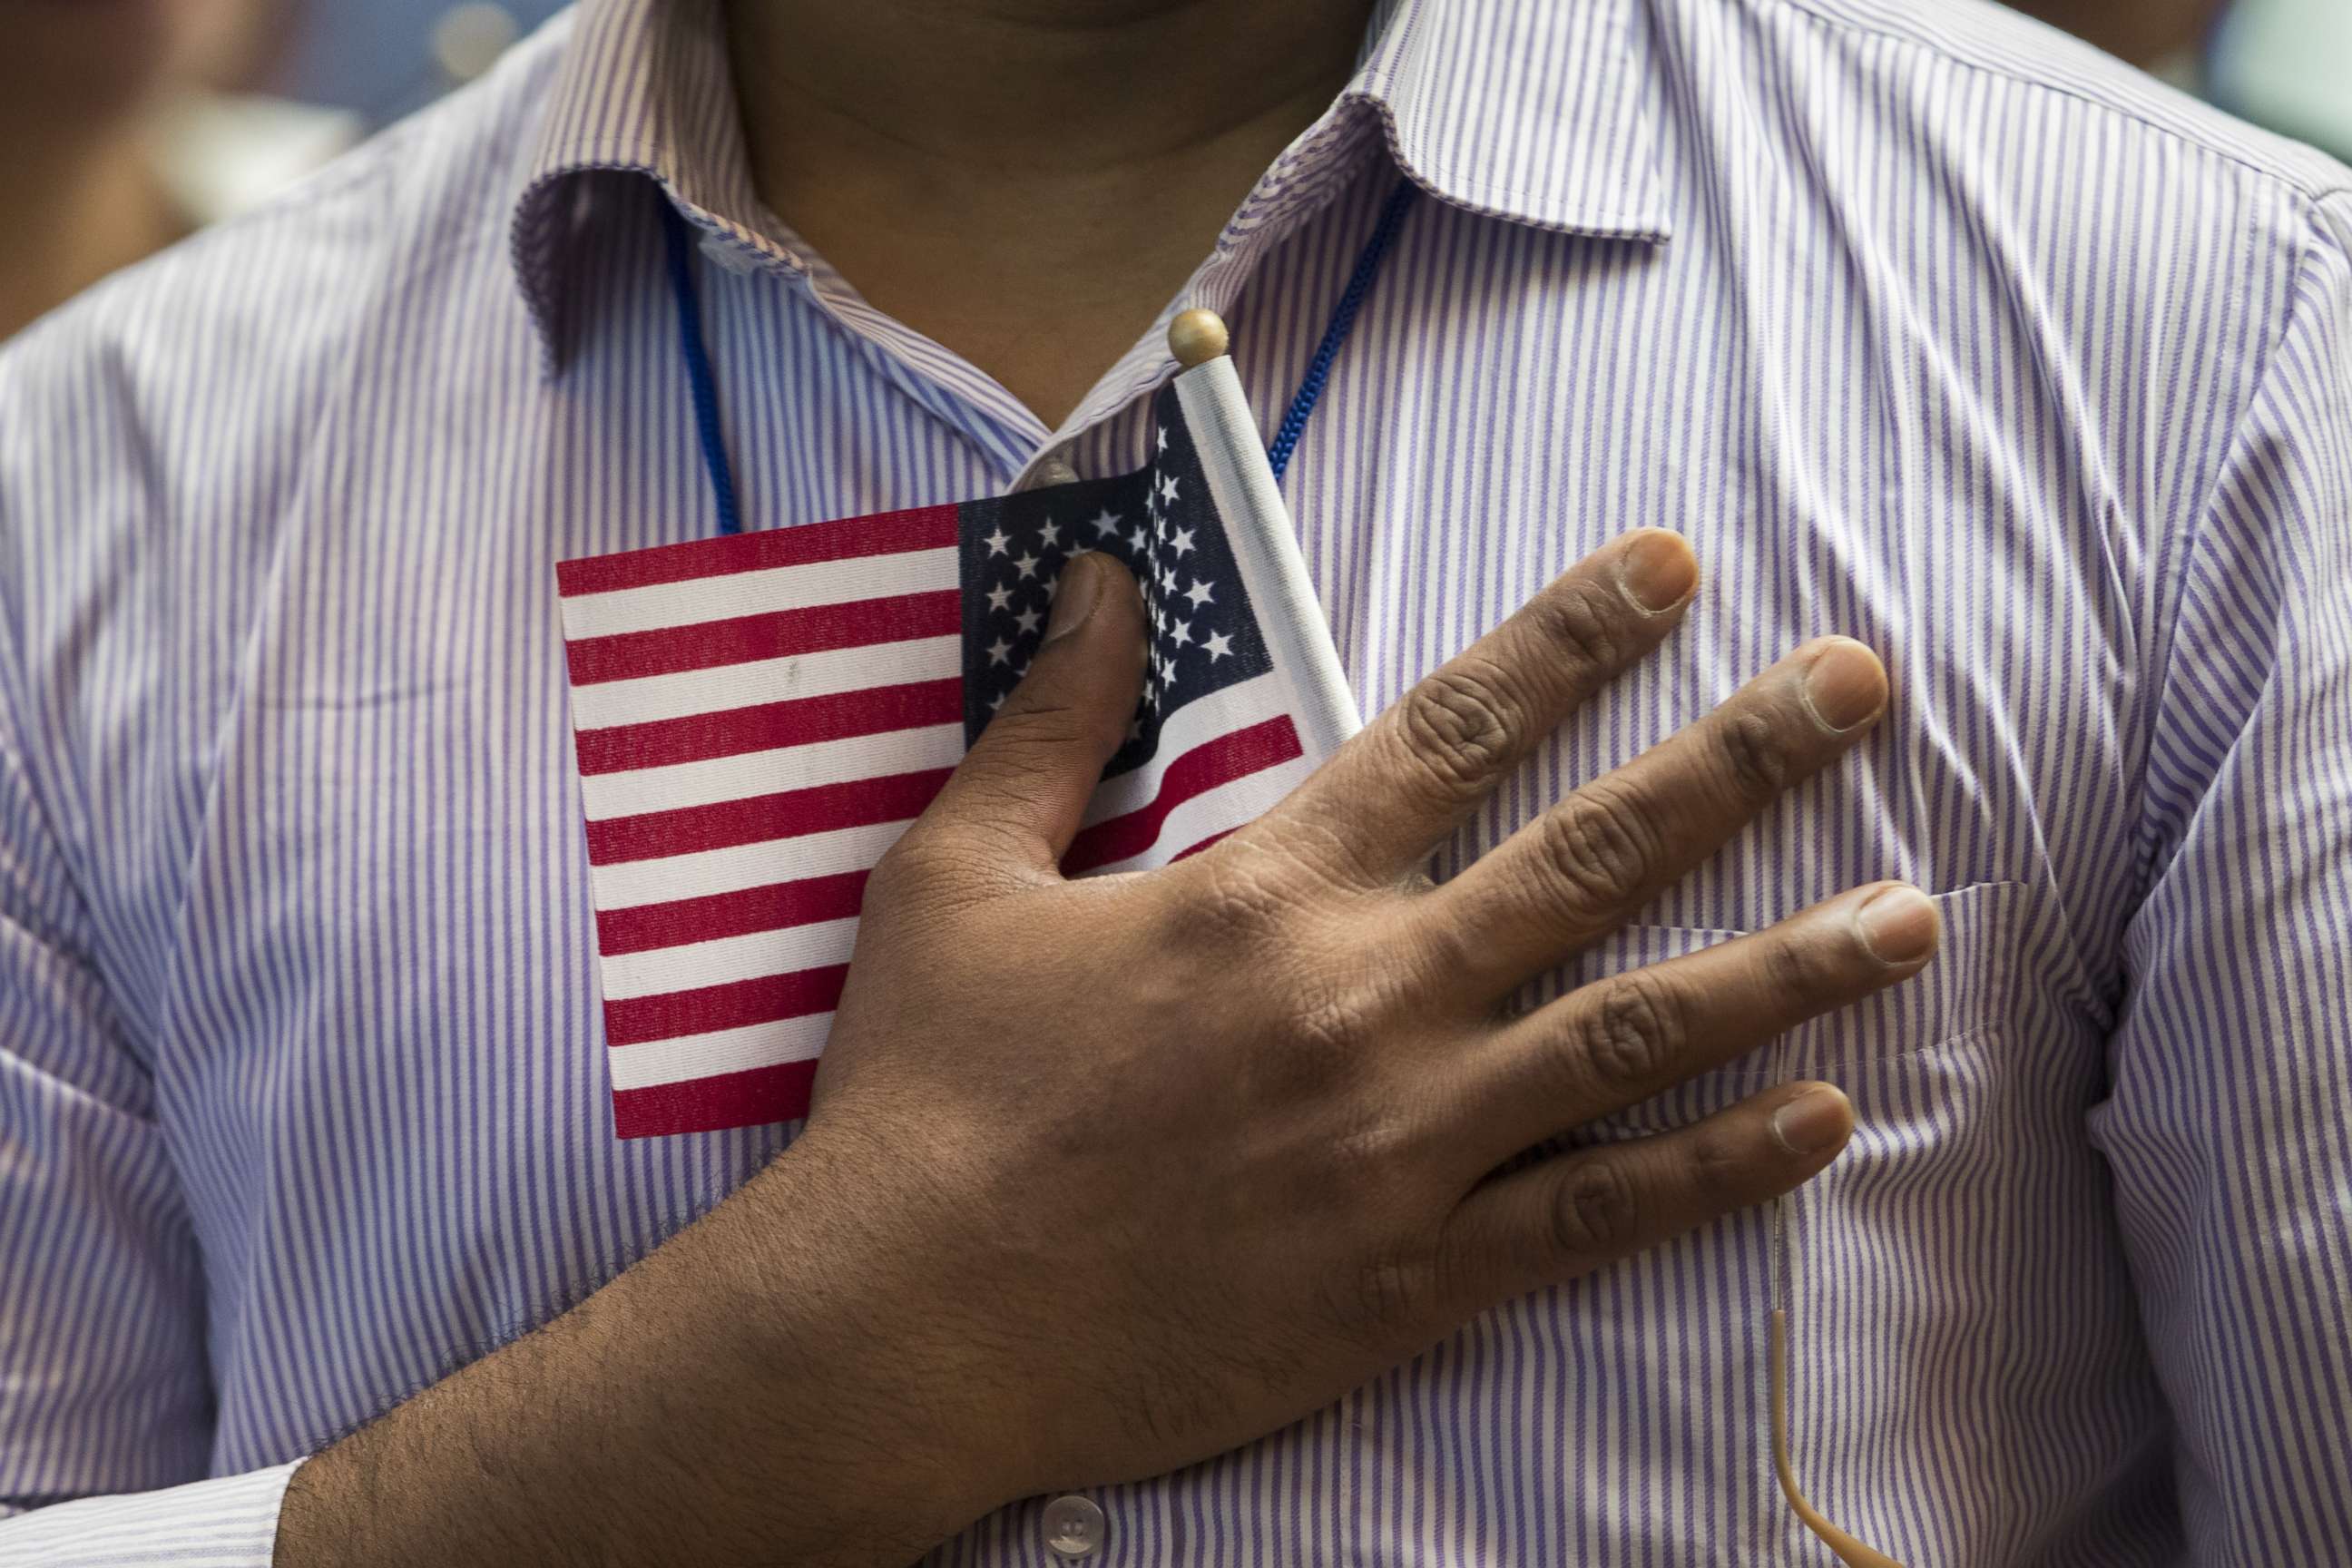 PHOTO: A new U.S. citizen holds a flag to his chest during the Pledge of Allegiance during a naturalization ceremony at the New York Public Library, July 3, 2018, in New York.